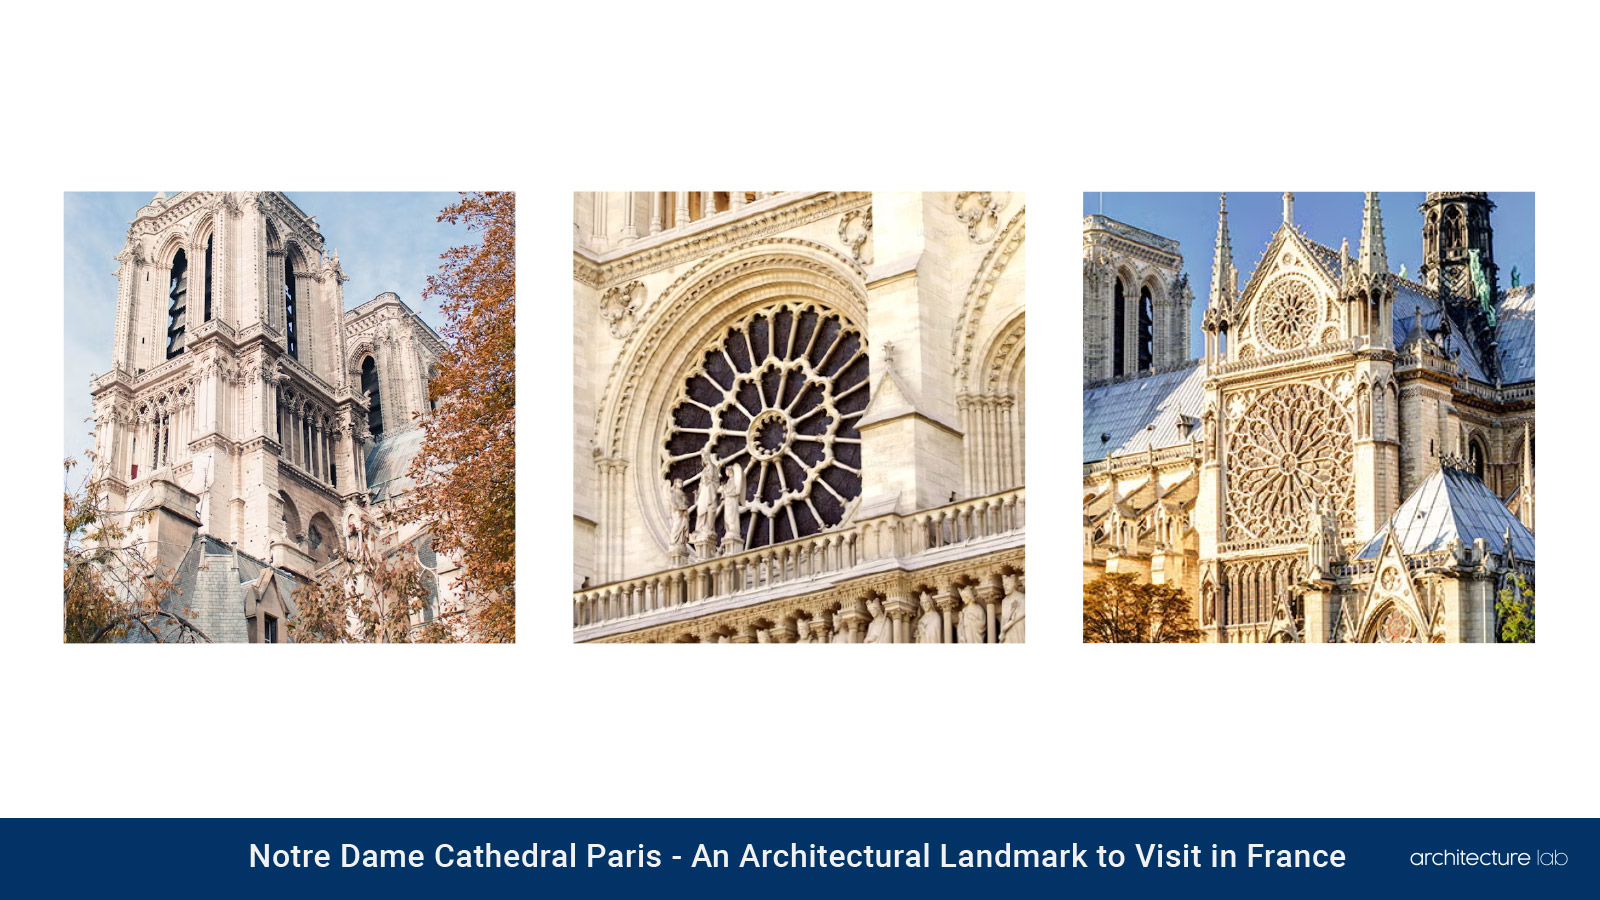 Notre dame cathedral paris: an architecture landmark to visit in france